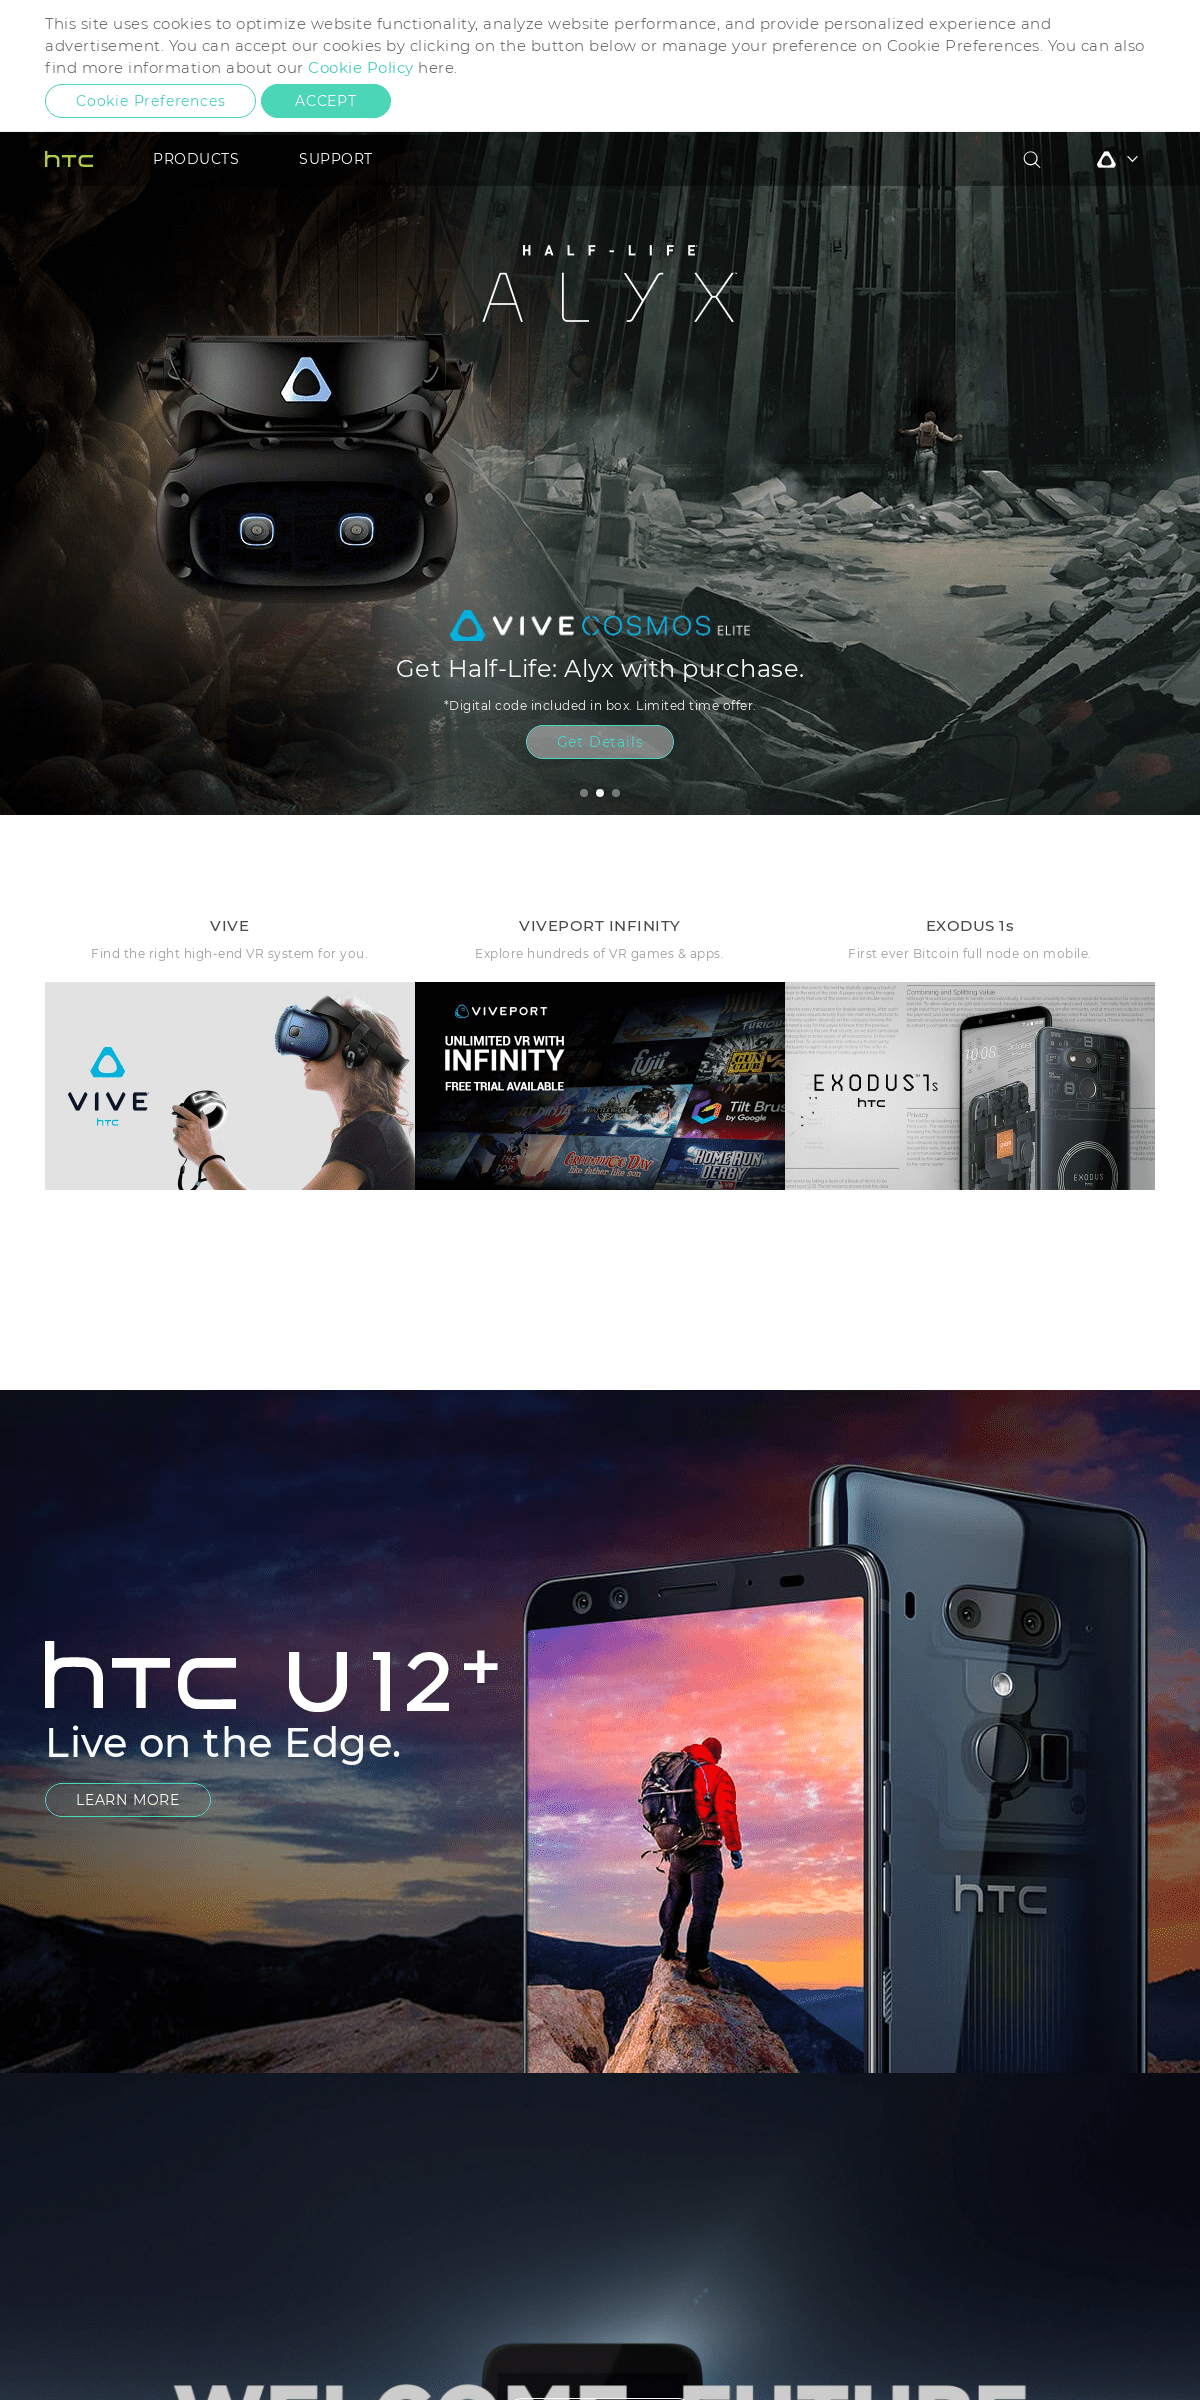 A complete backup of htc.com